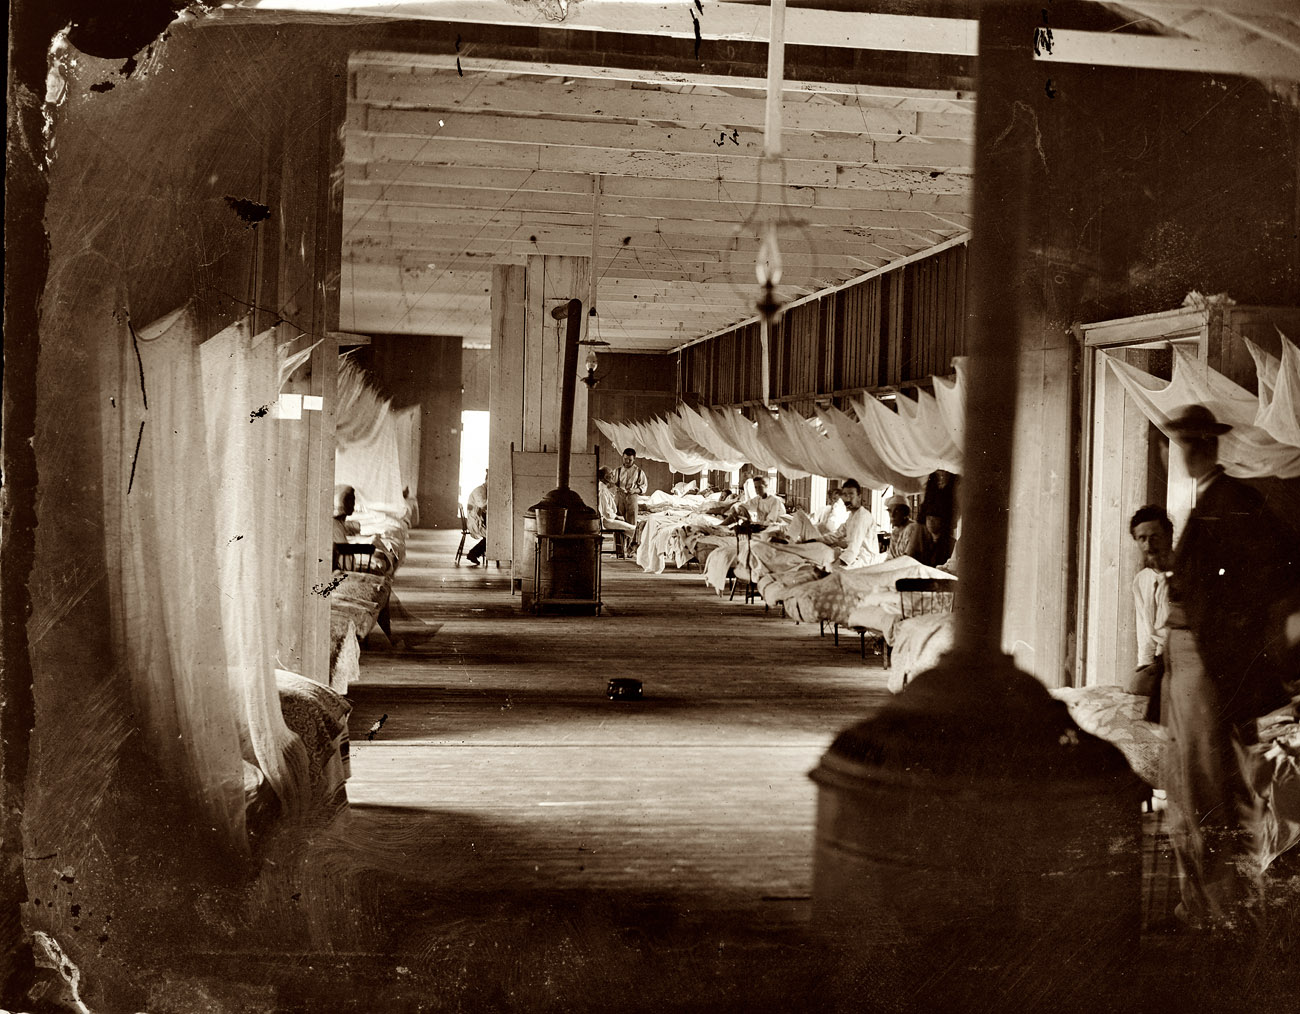 Washington circa 1863. Wounded soldiers at Harewood Hospital with mosquito netting over their beds. View full size. Left half of a glass-plate stereograph.